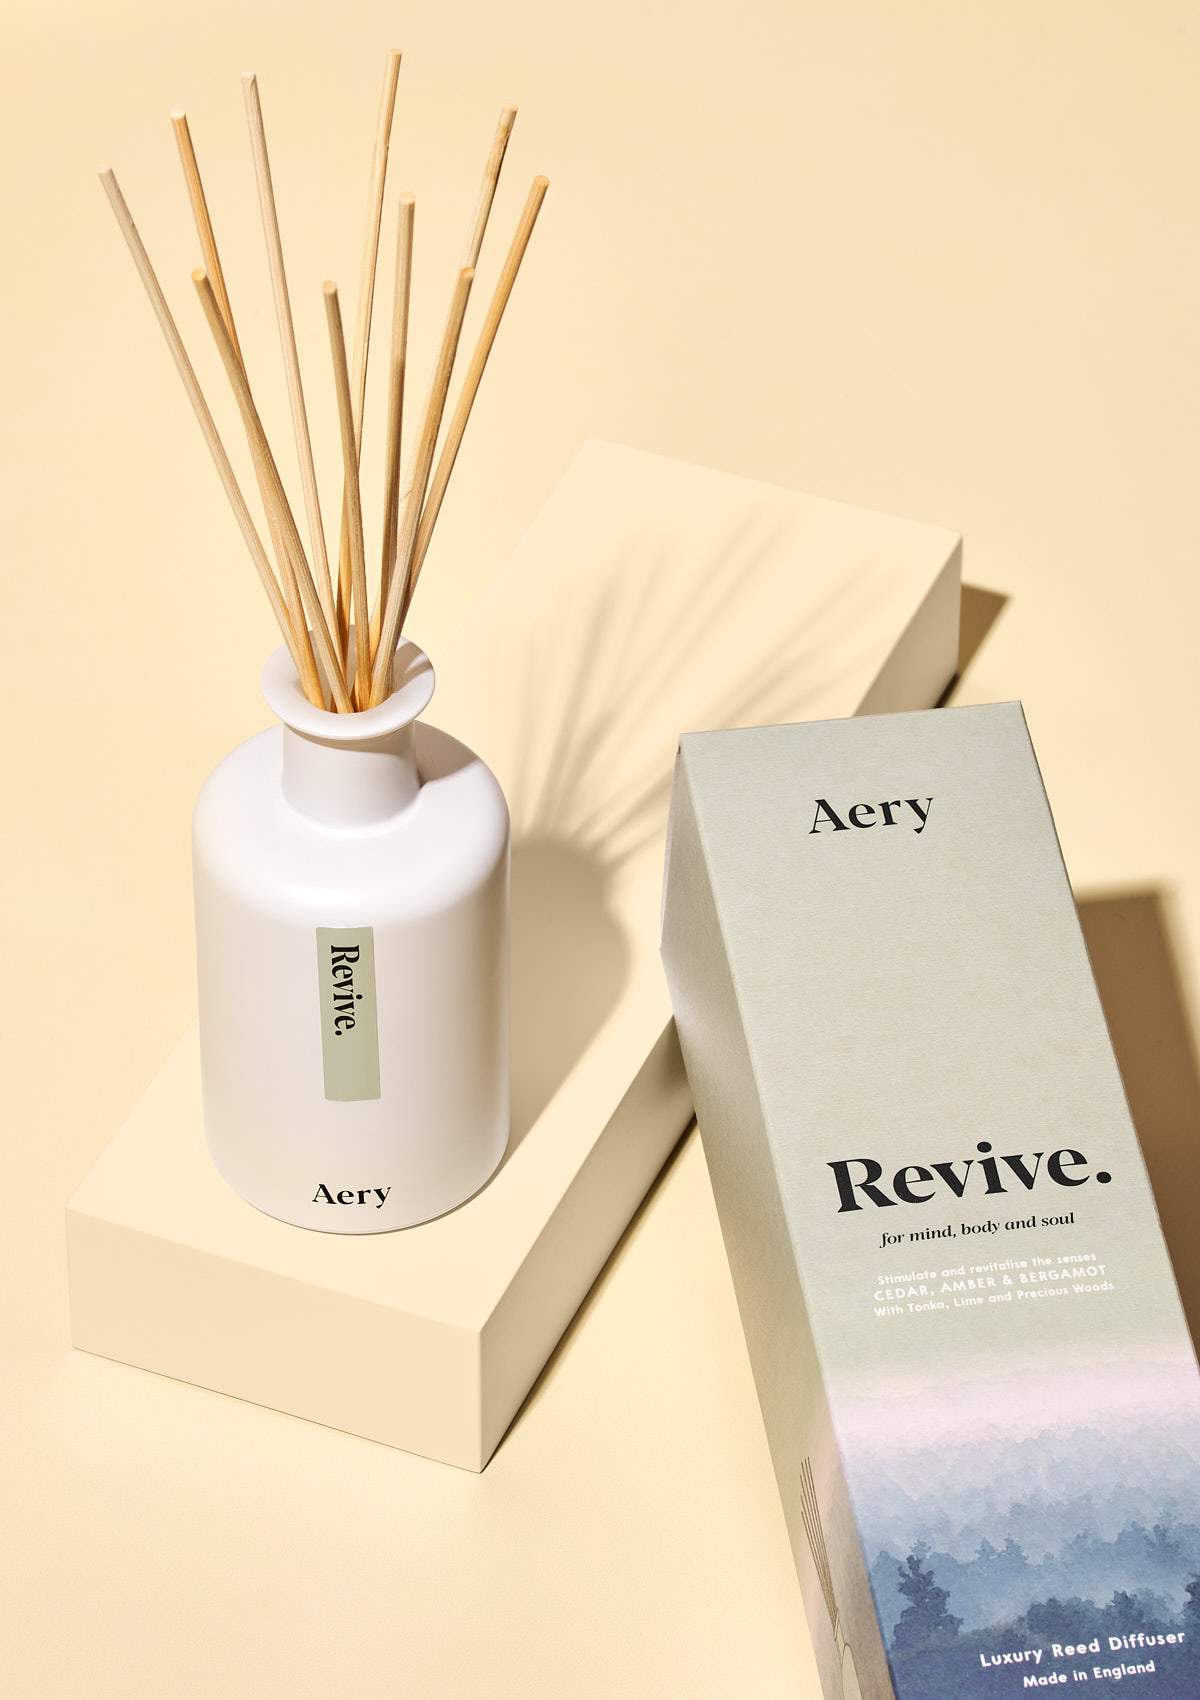 aery living revive reed diffuser next to green product packaging on a yellow background